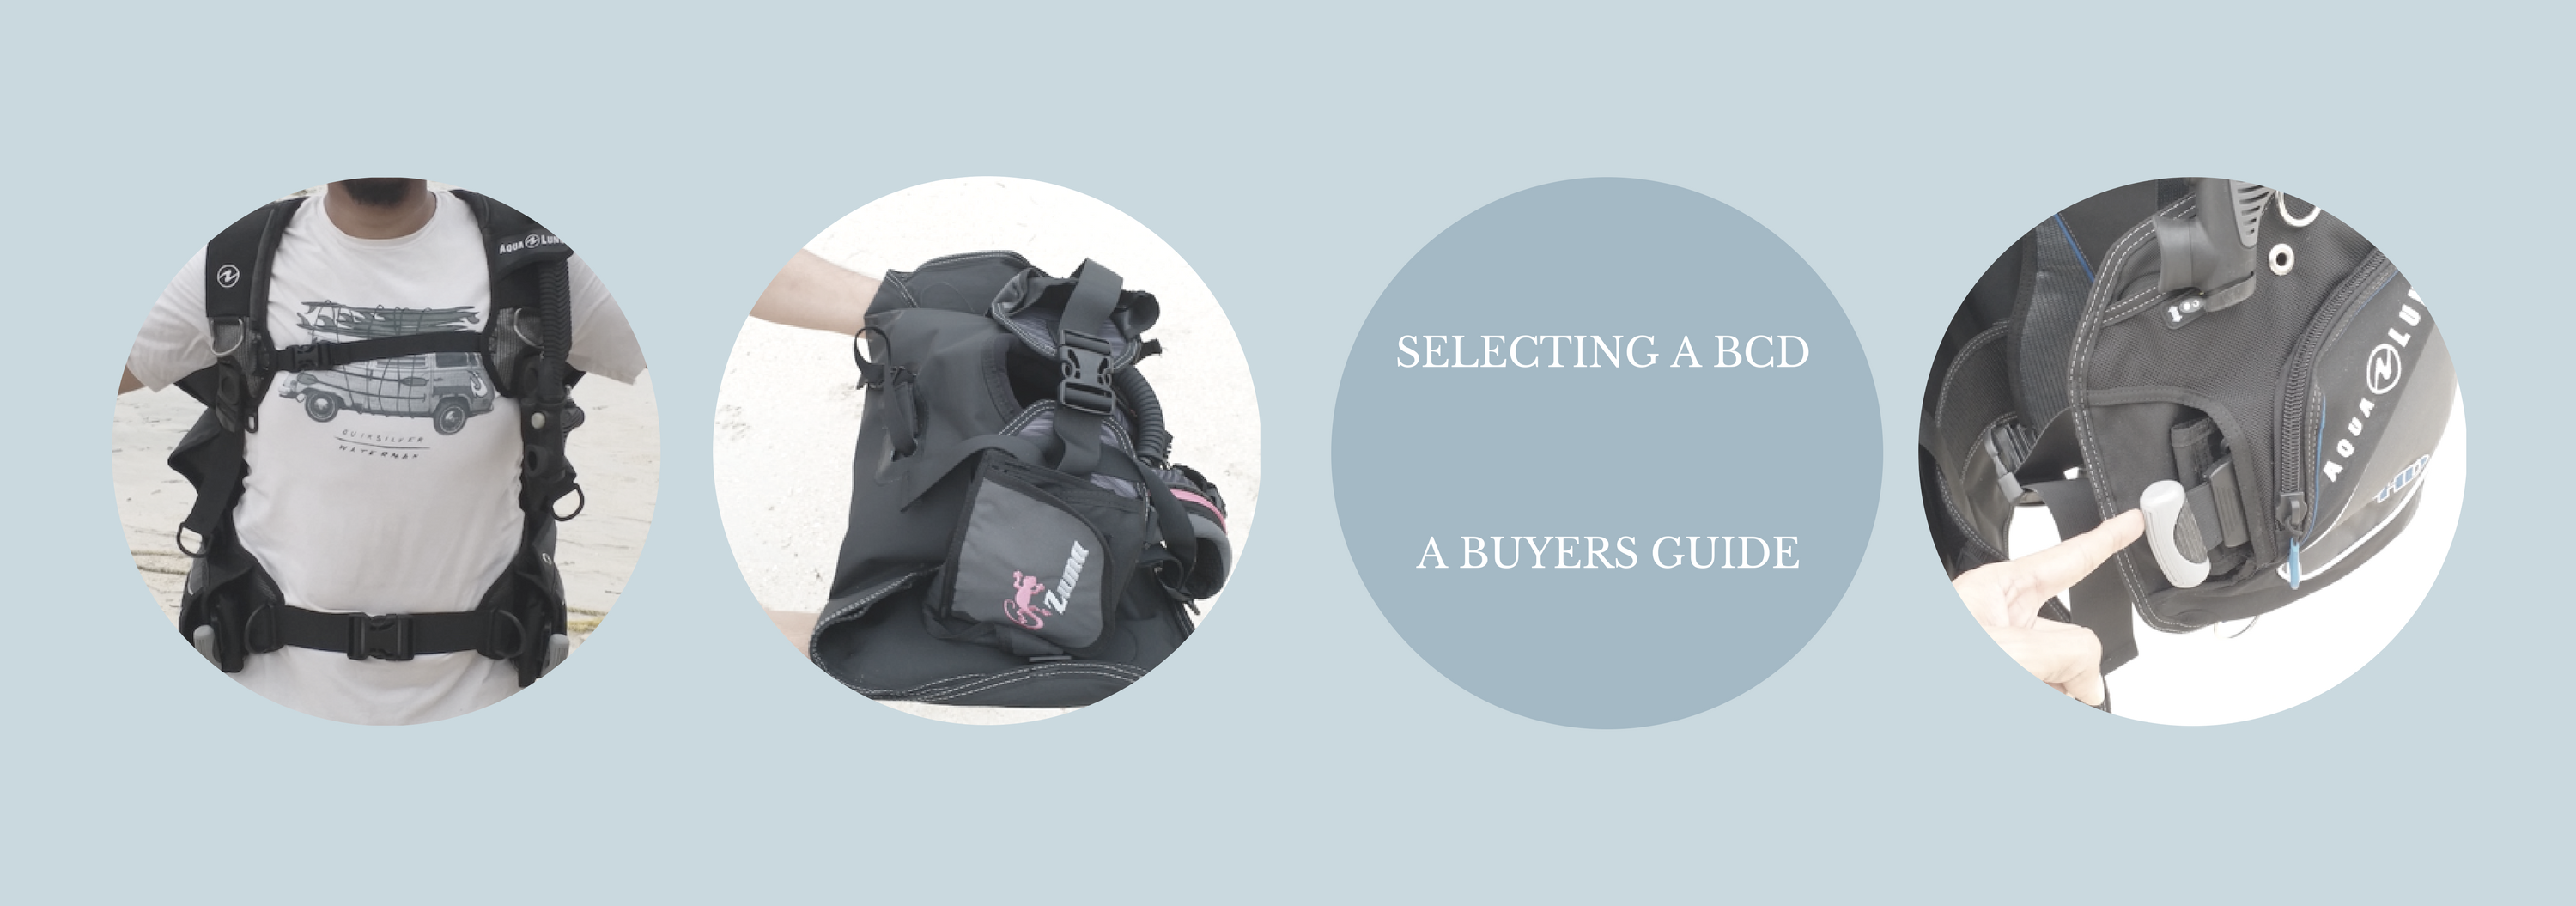 BCD Buyers Guide: How to buy the right BCD